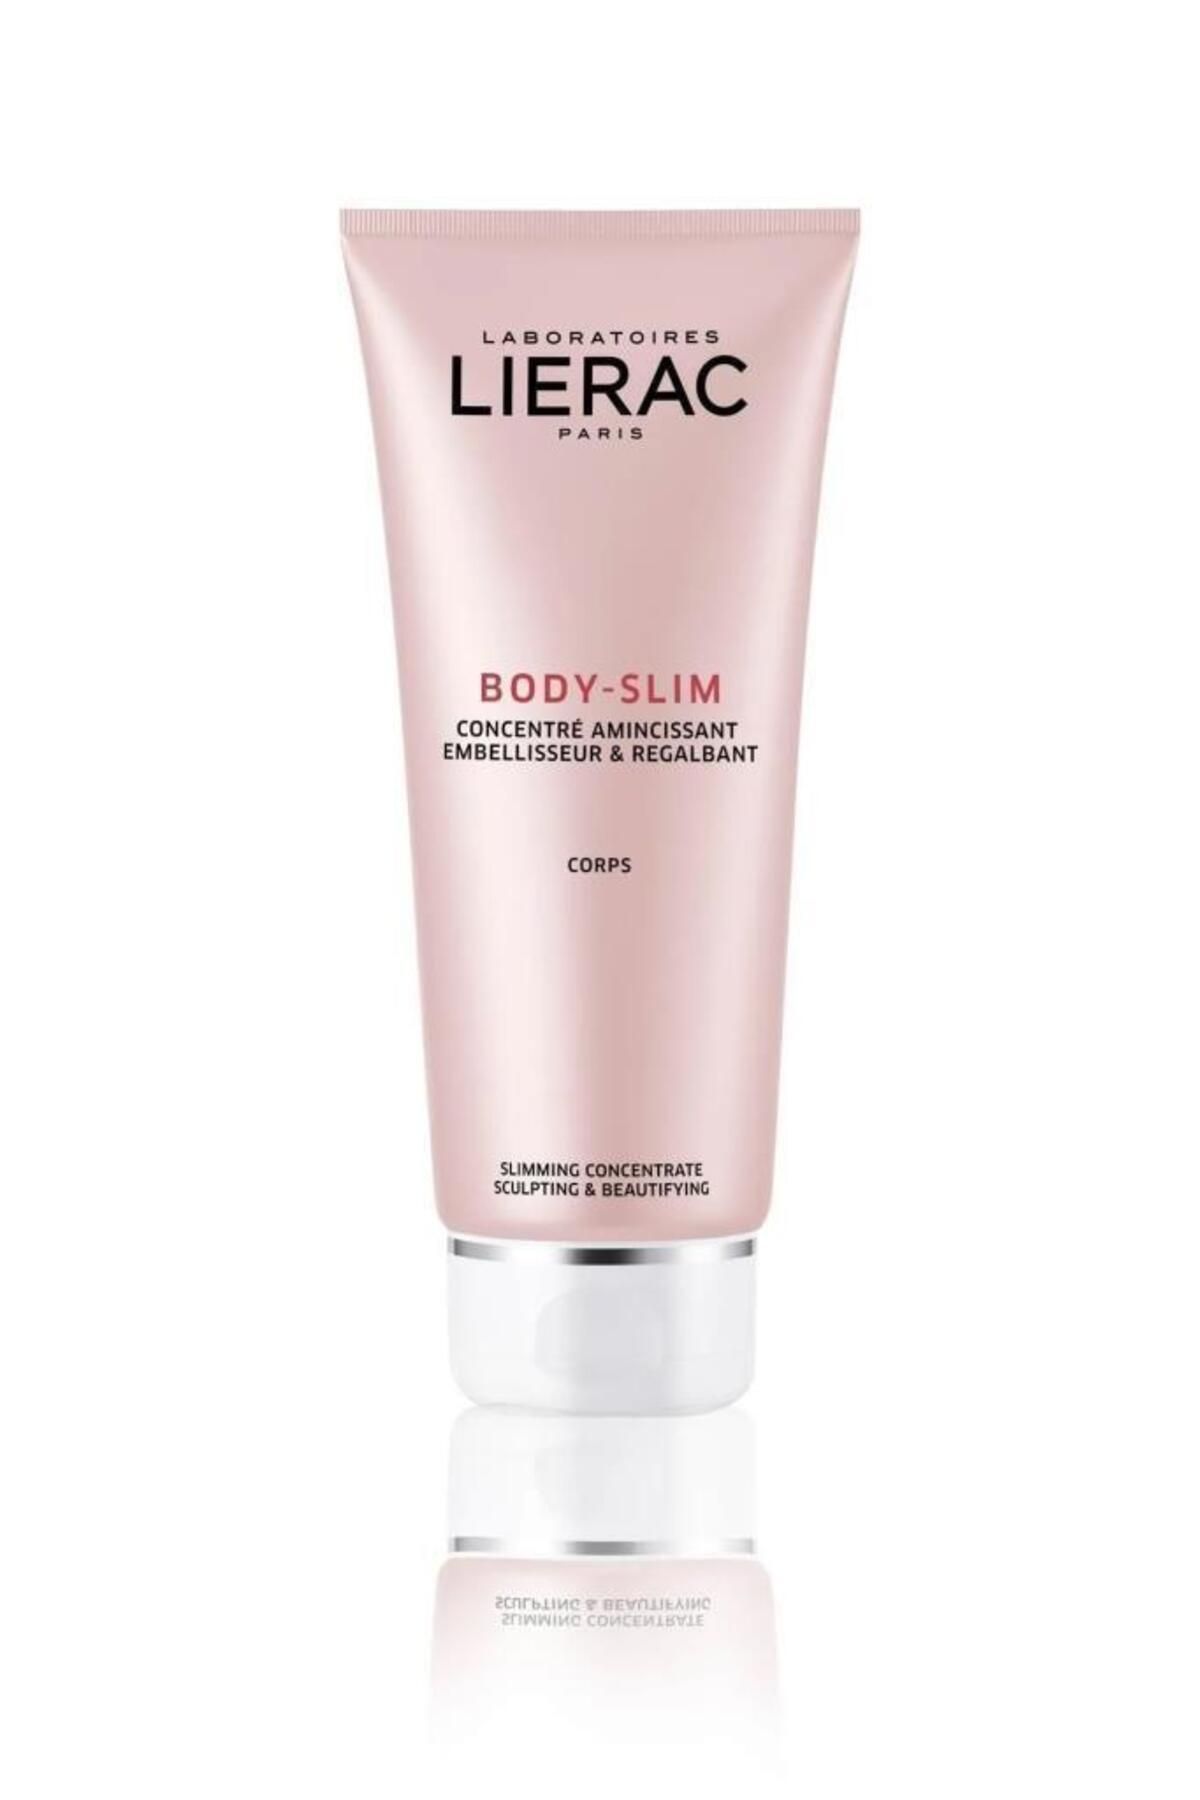 Lierac Body Slim Concentrate Sculpting Beautifying 200 ml